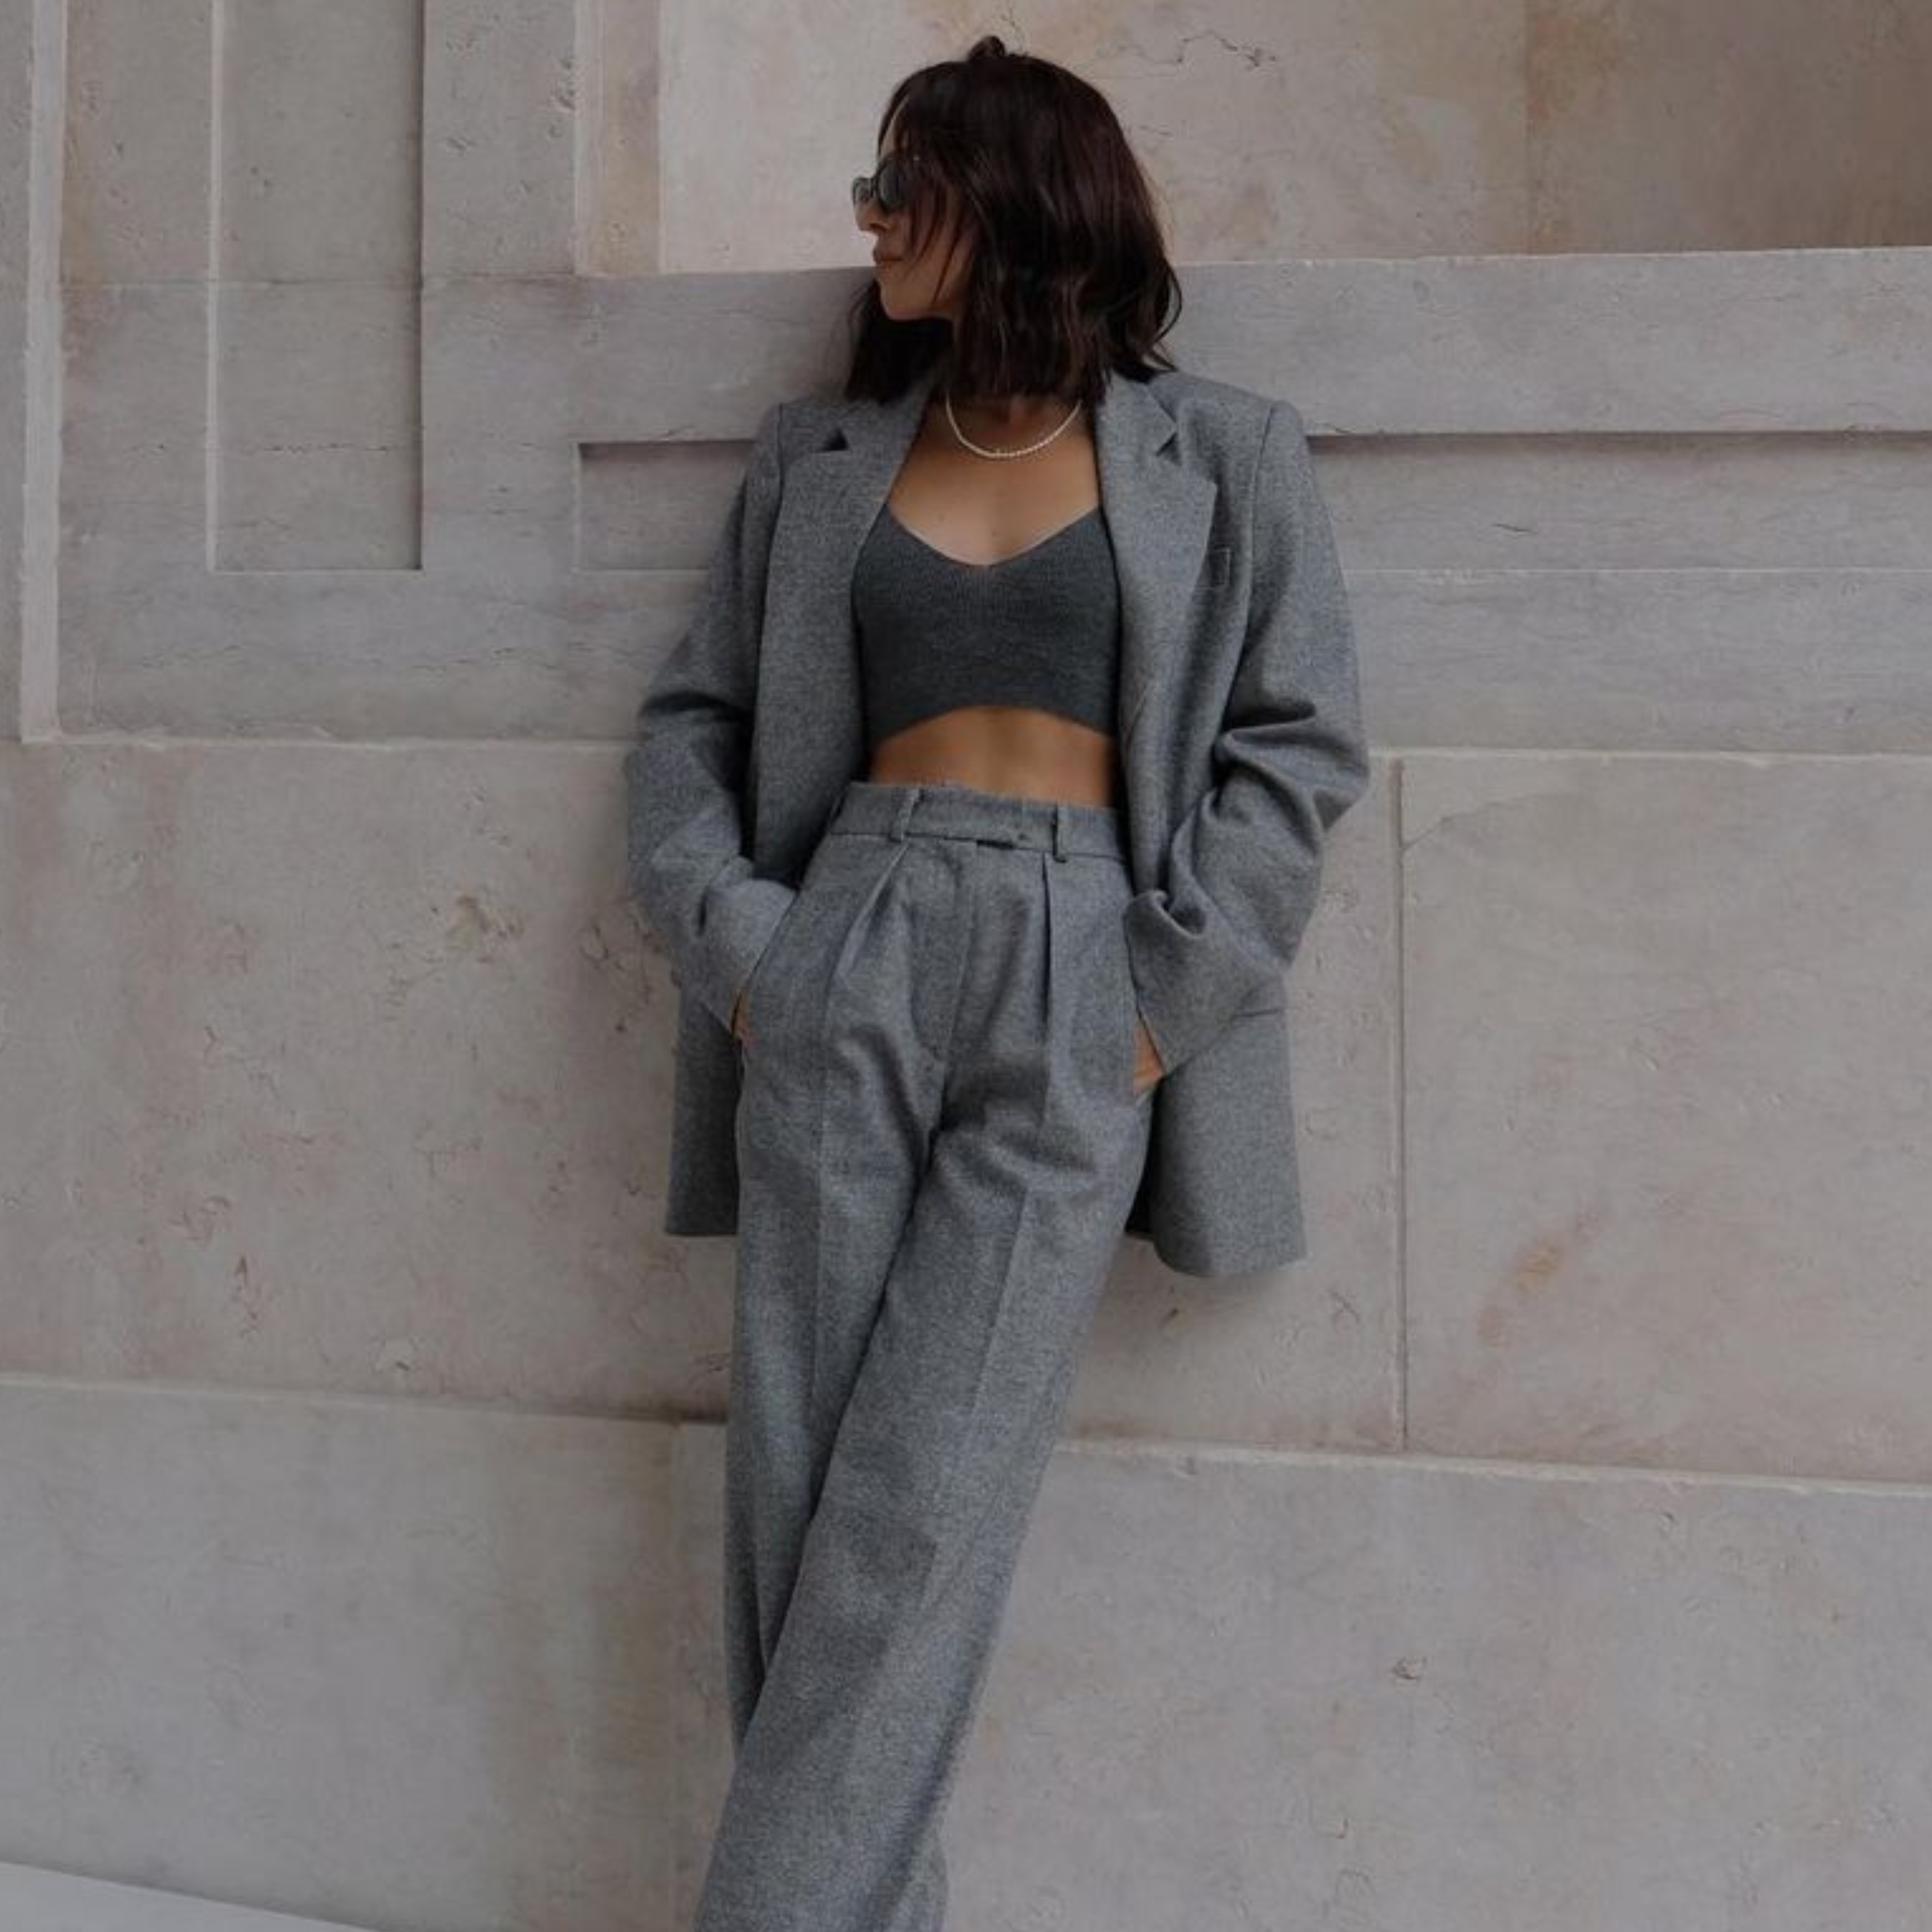 Groutfits' Are The All-Gray Outfits Everyone's Wearing This Winter